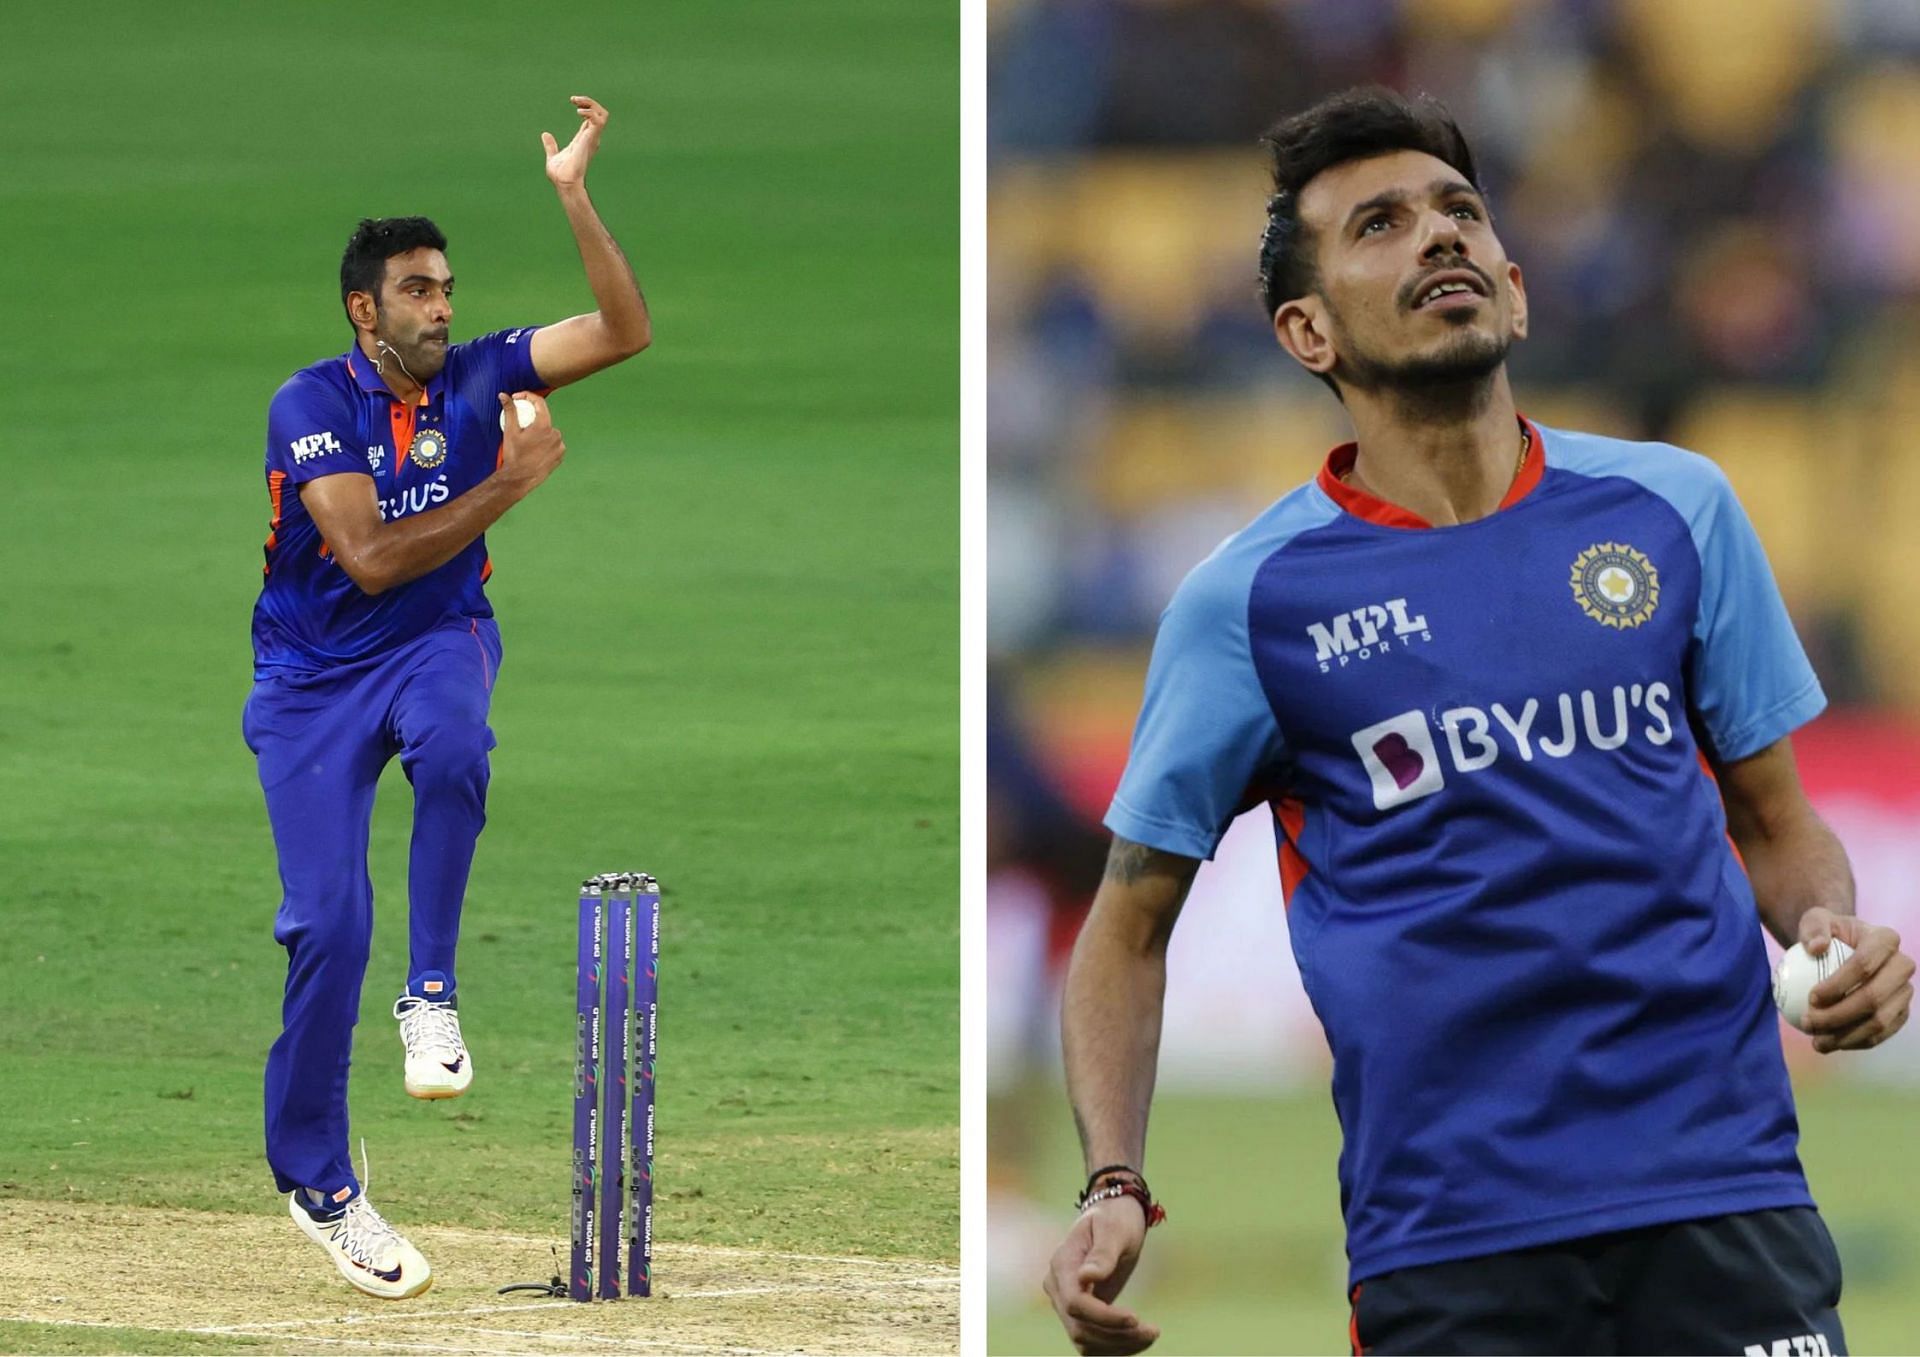 Ravichandran Ashwin and Yuzvendra Chahal are tussling it out for the lead spinner